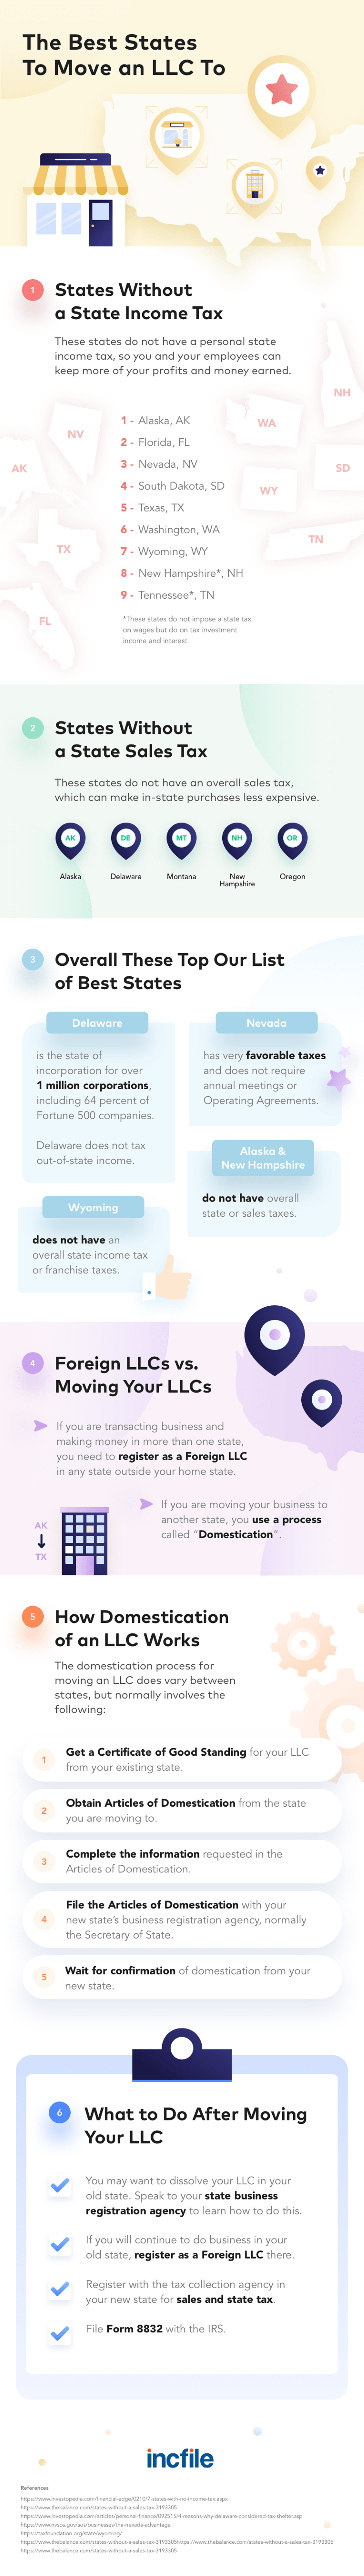 So You Moved? Follow This Guide To Moving Your LLC to Another State #infographic